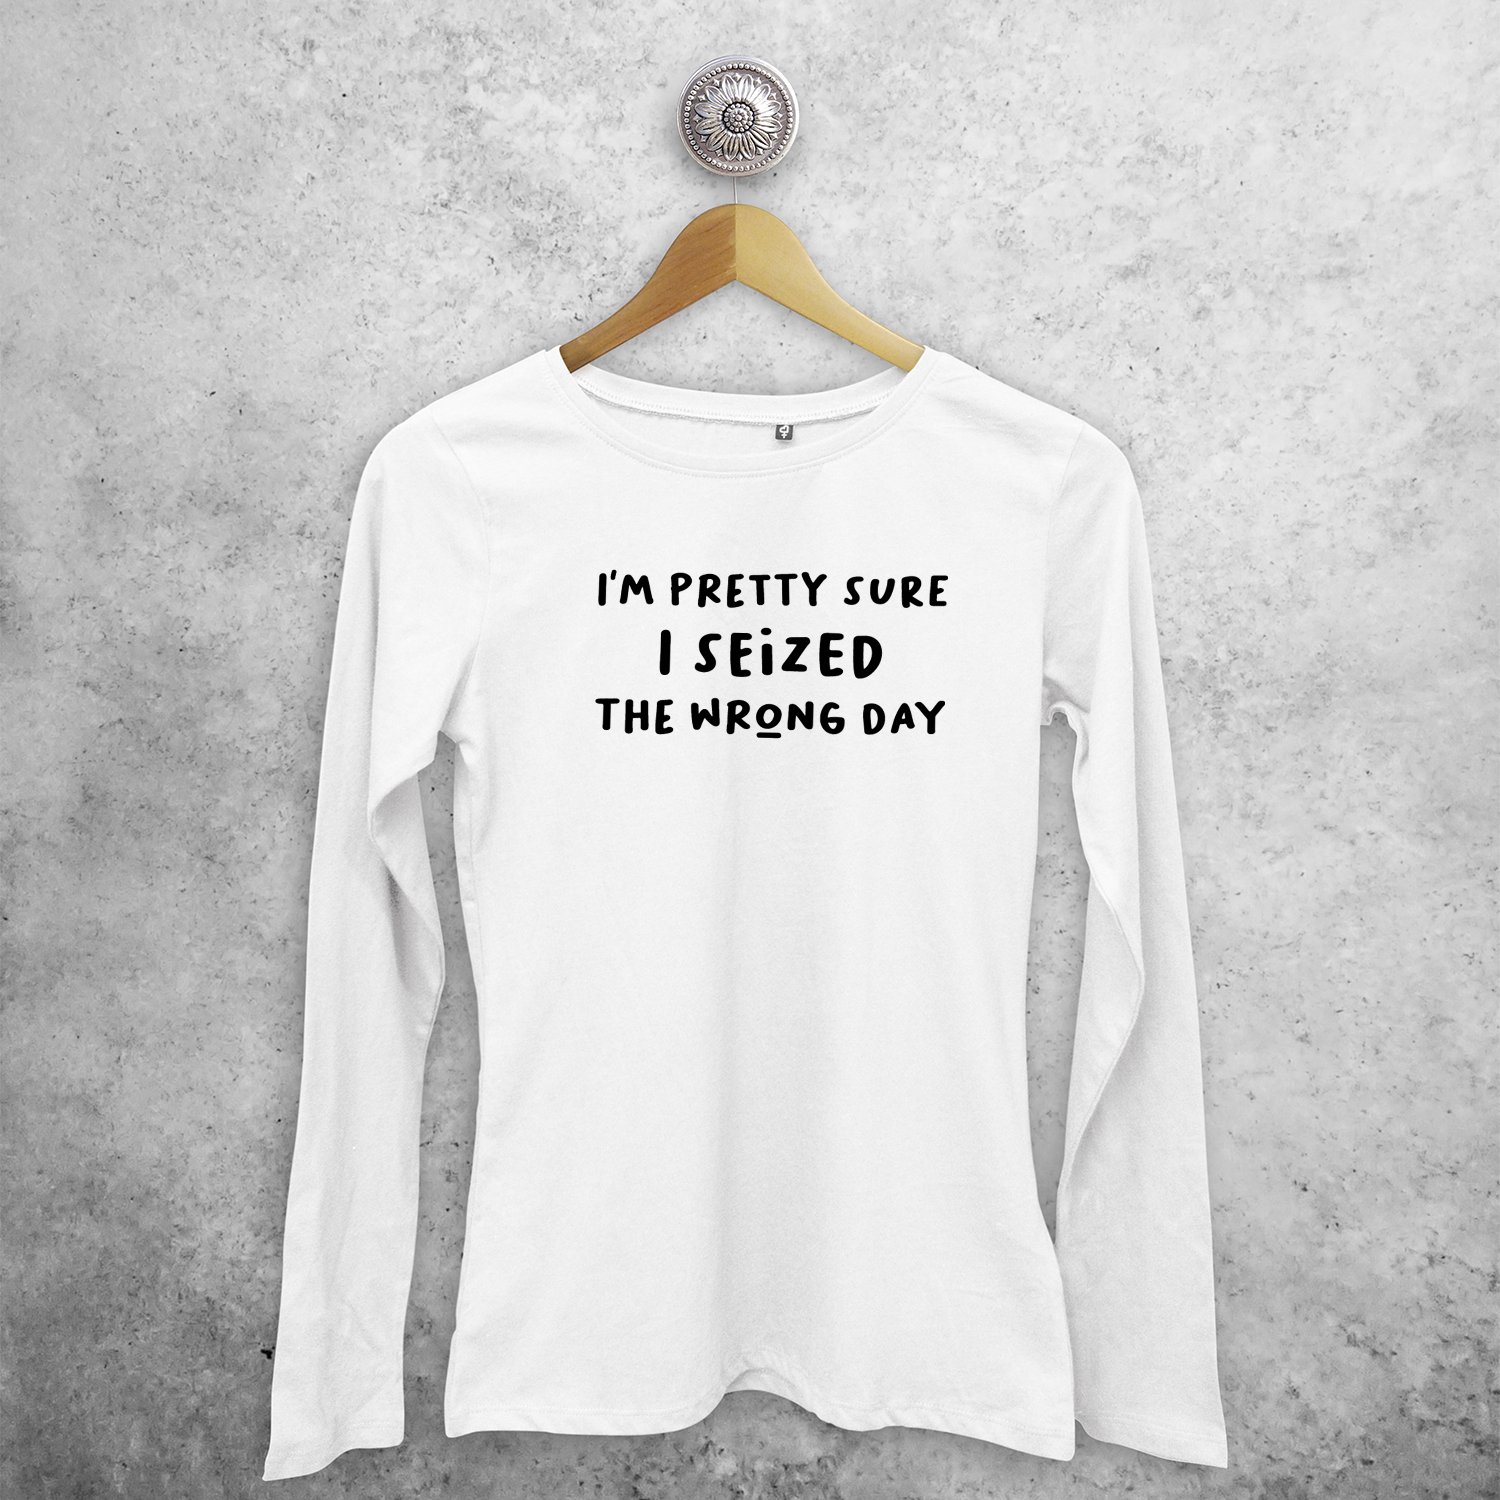 'I'm pretty sure I seized the wrong day' adult longsleeve shirt